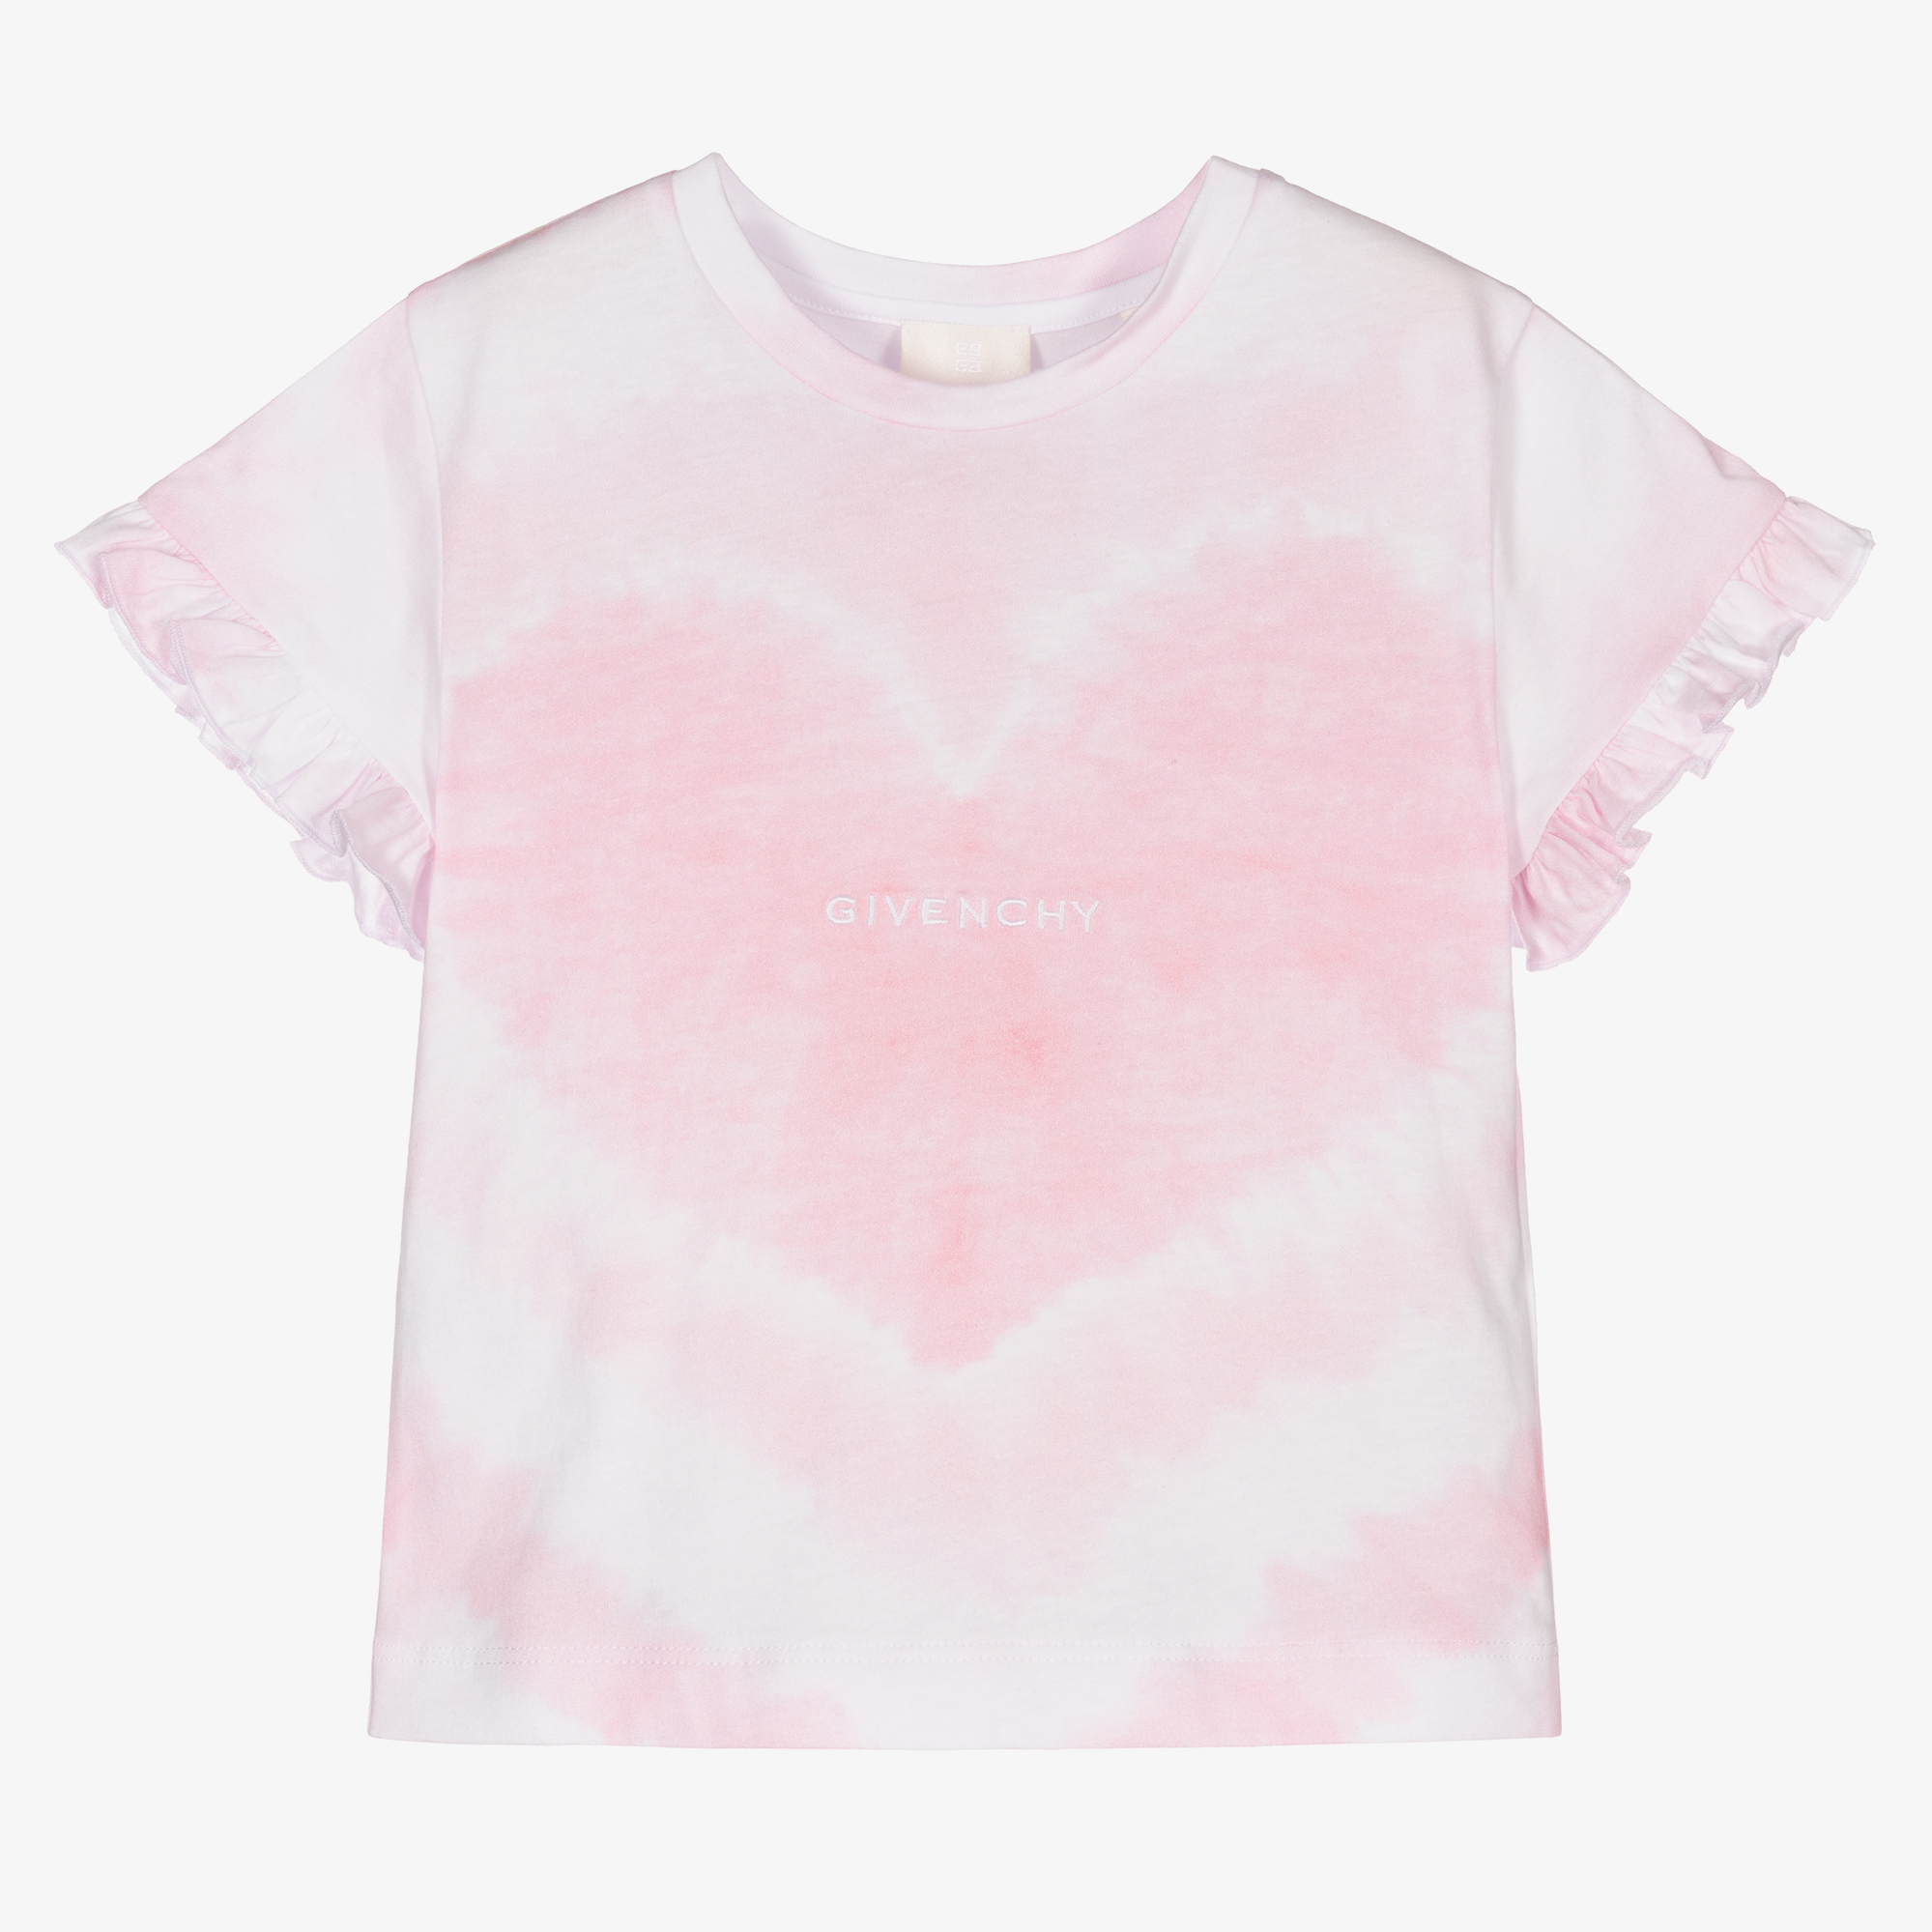 Givenchy - Pink Tie Dye Heart T-Shirt